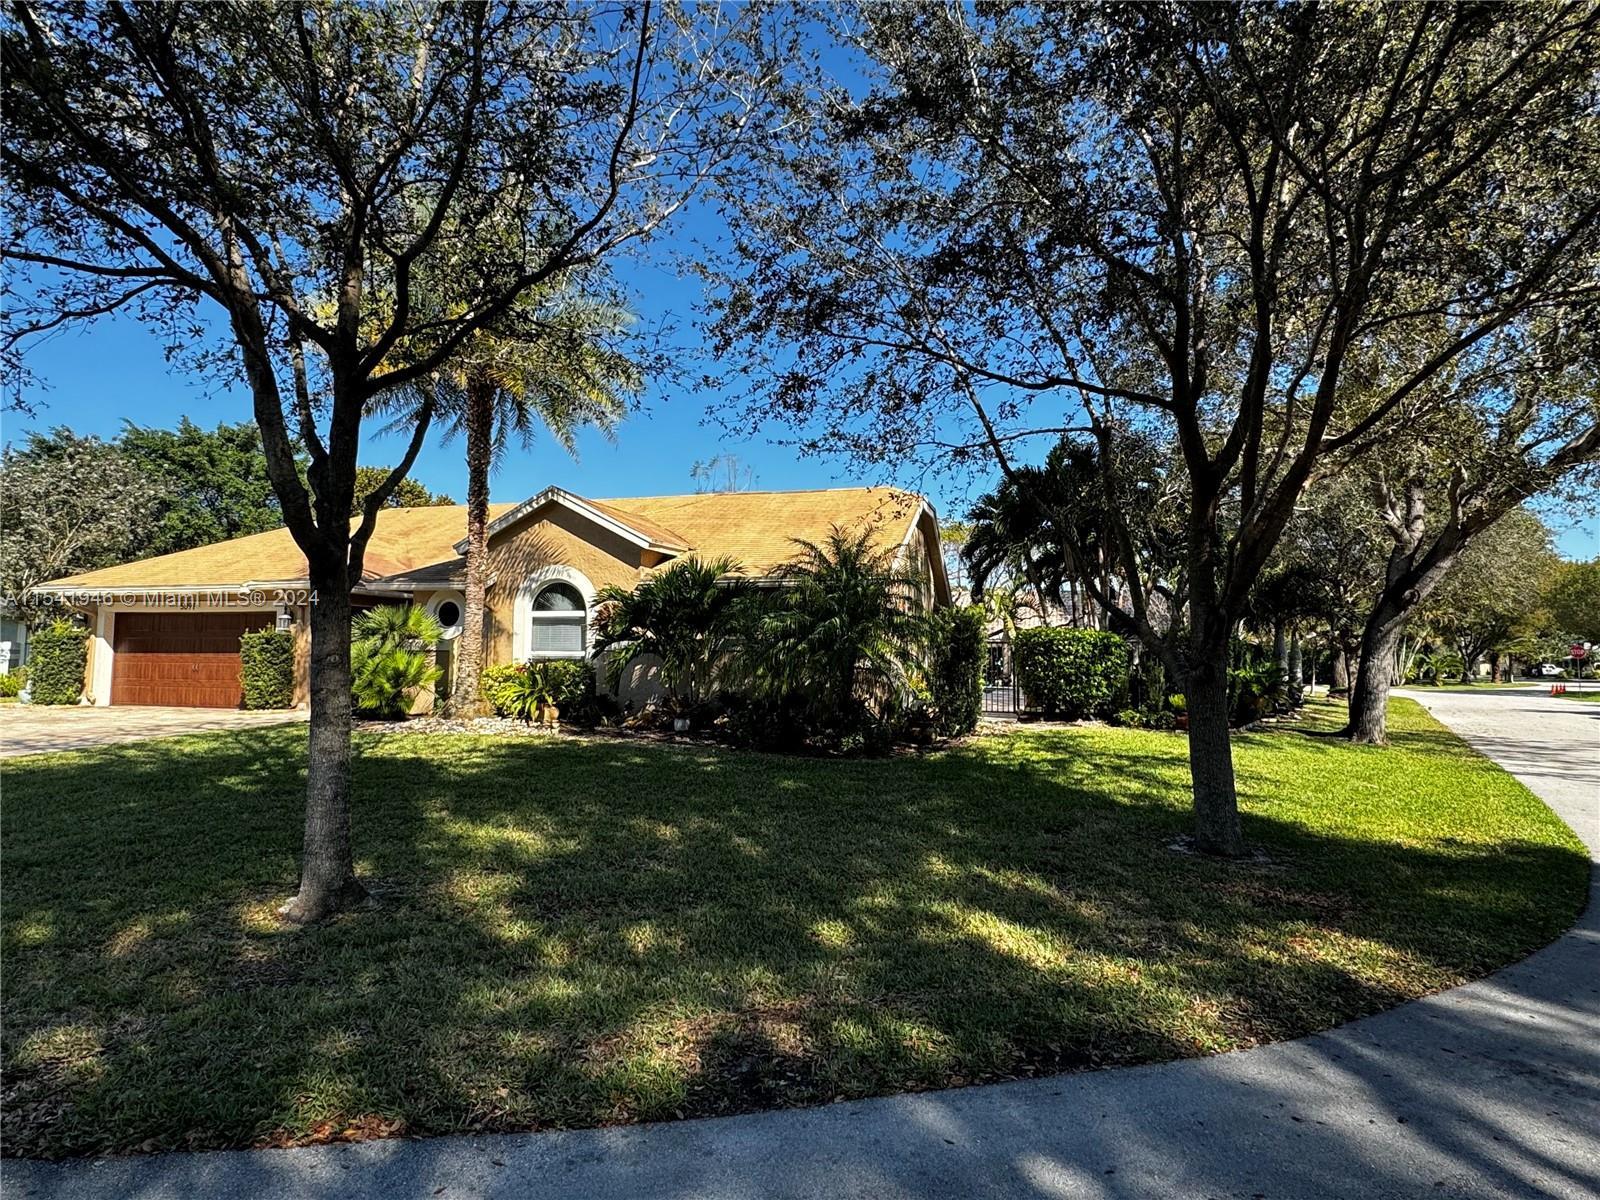 Photo of 5091 NW 51st Ave in Coconut Creek, FL